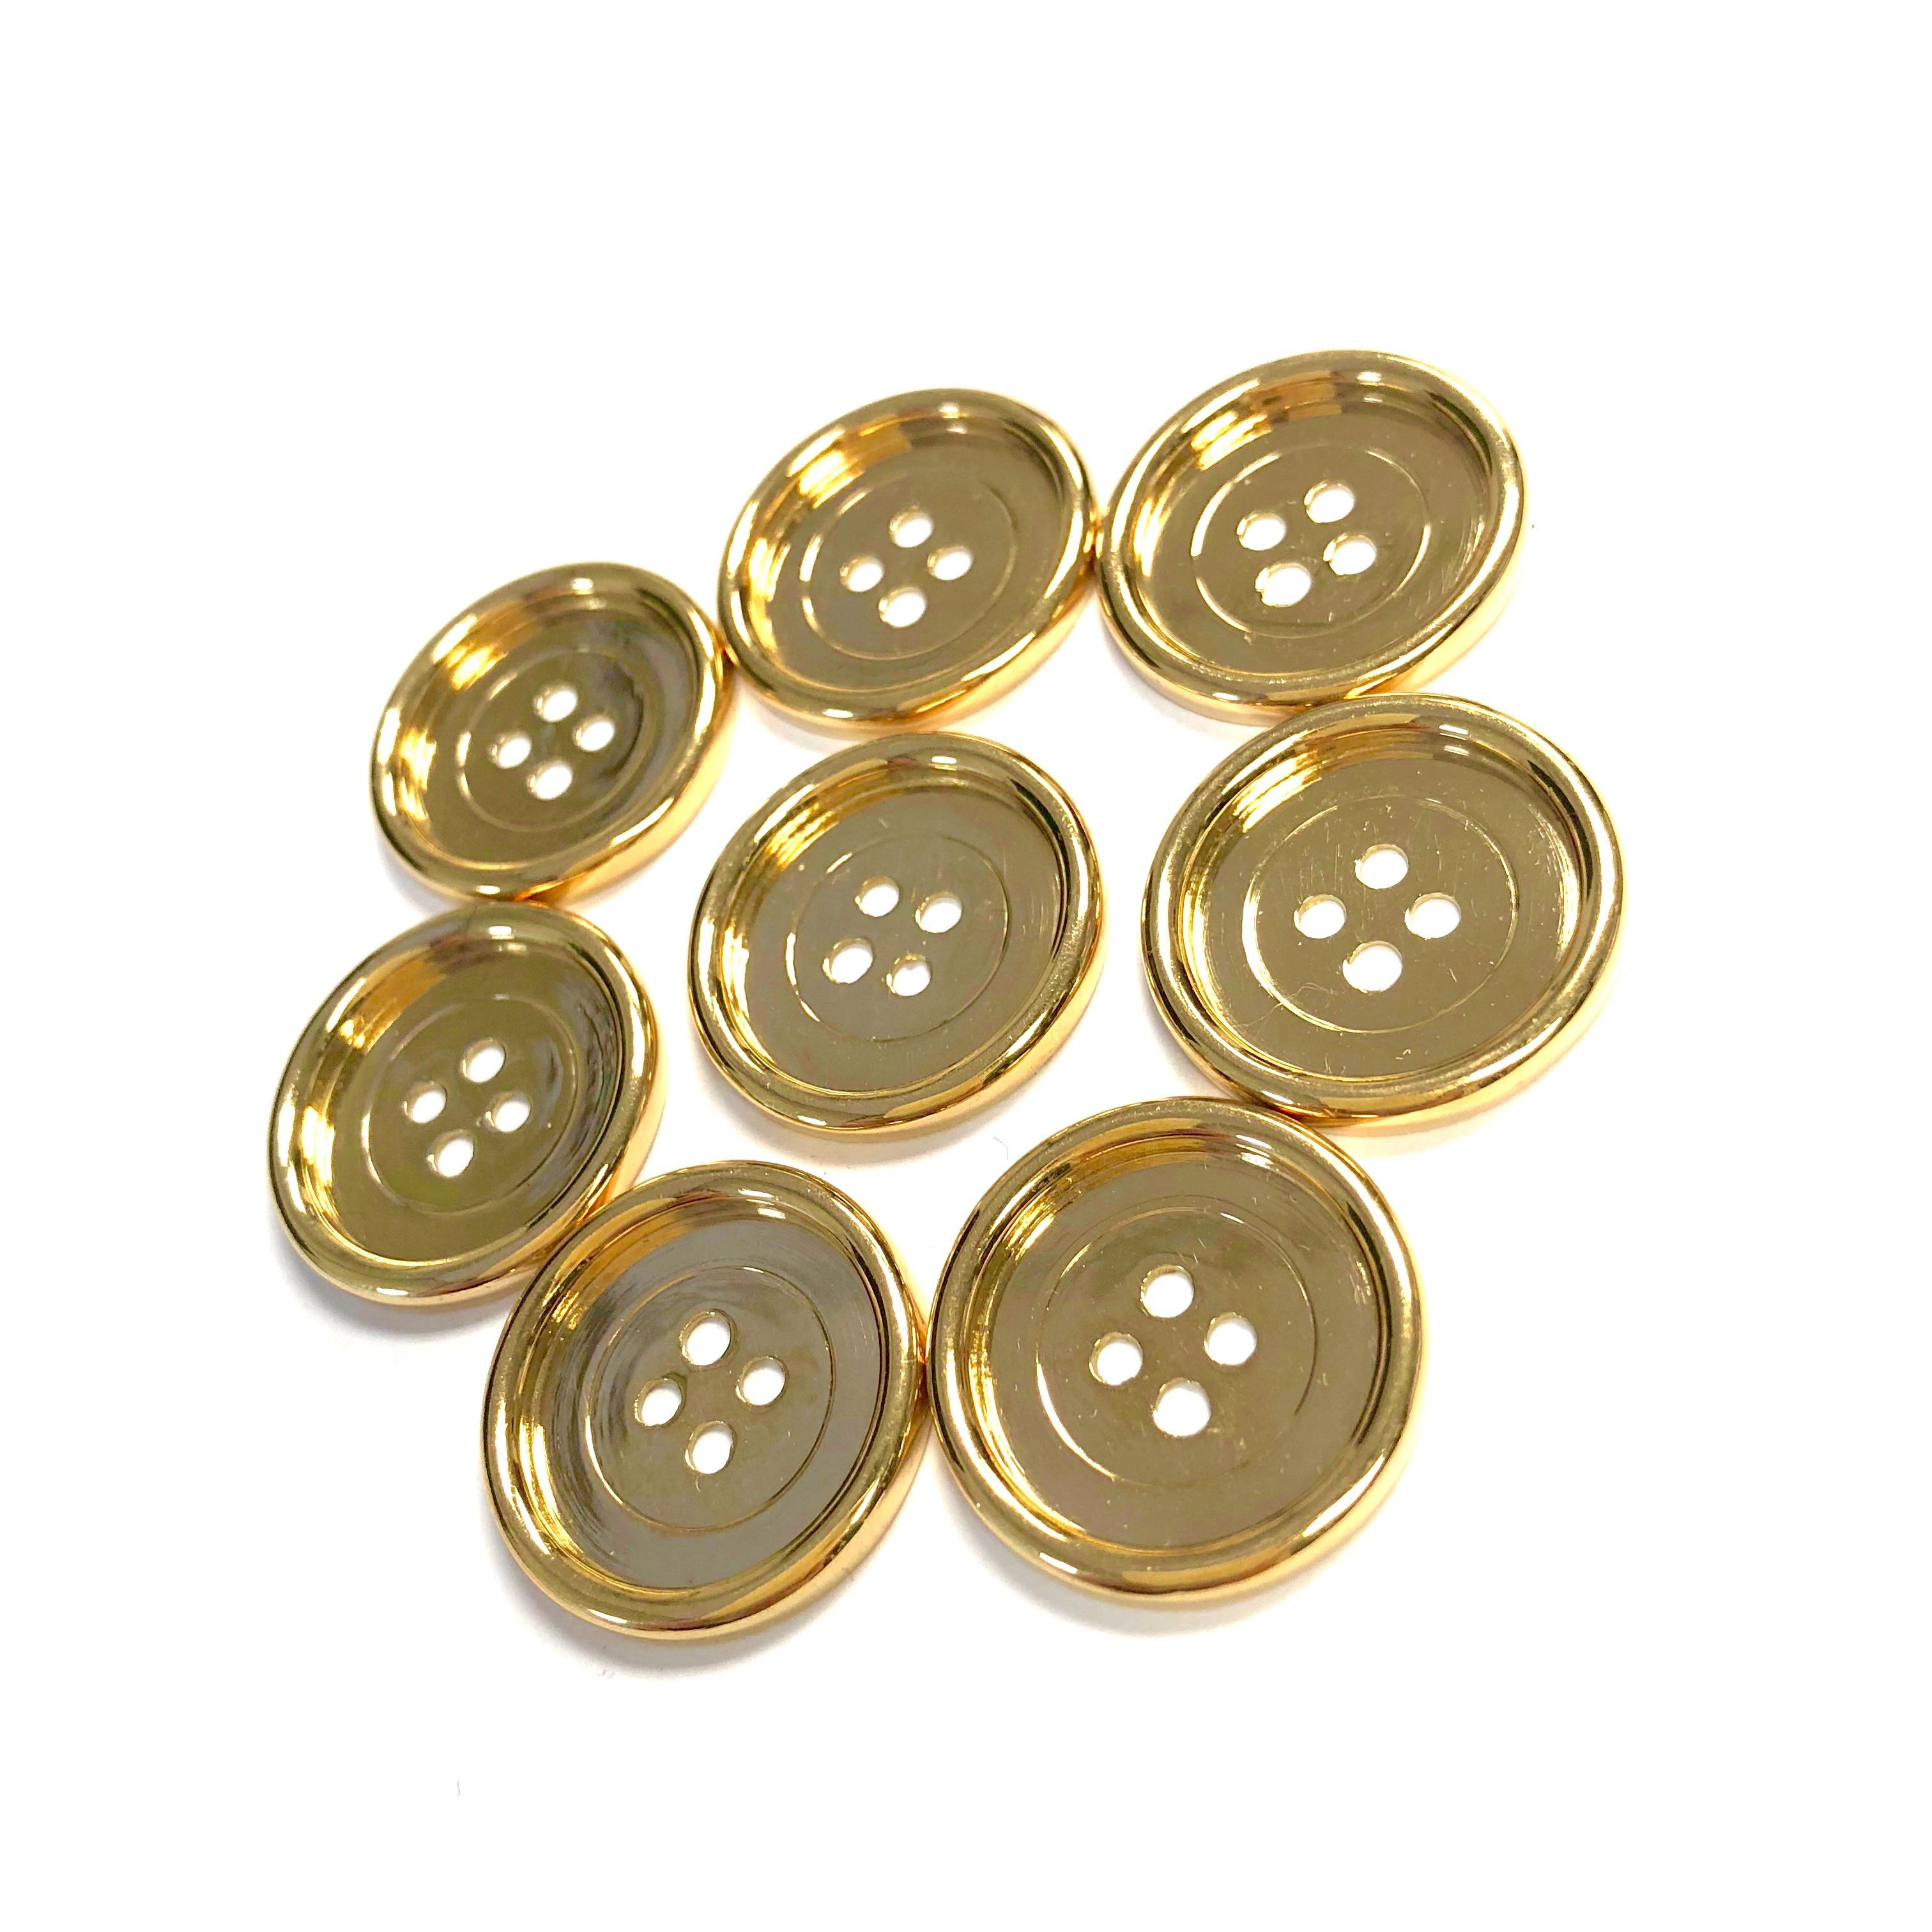 Set of 8 vintage round, high polished 18K gold buttons by M. Gerard Paris. Each button measures 22.5mm in diameter with a 2.5mm doughnut style rim.
Total weight: 47 grams
Marked: M. Gerard, serial number, French assay and maker's marks.
Condition: